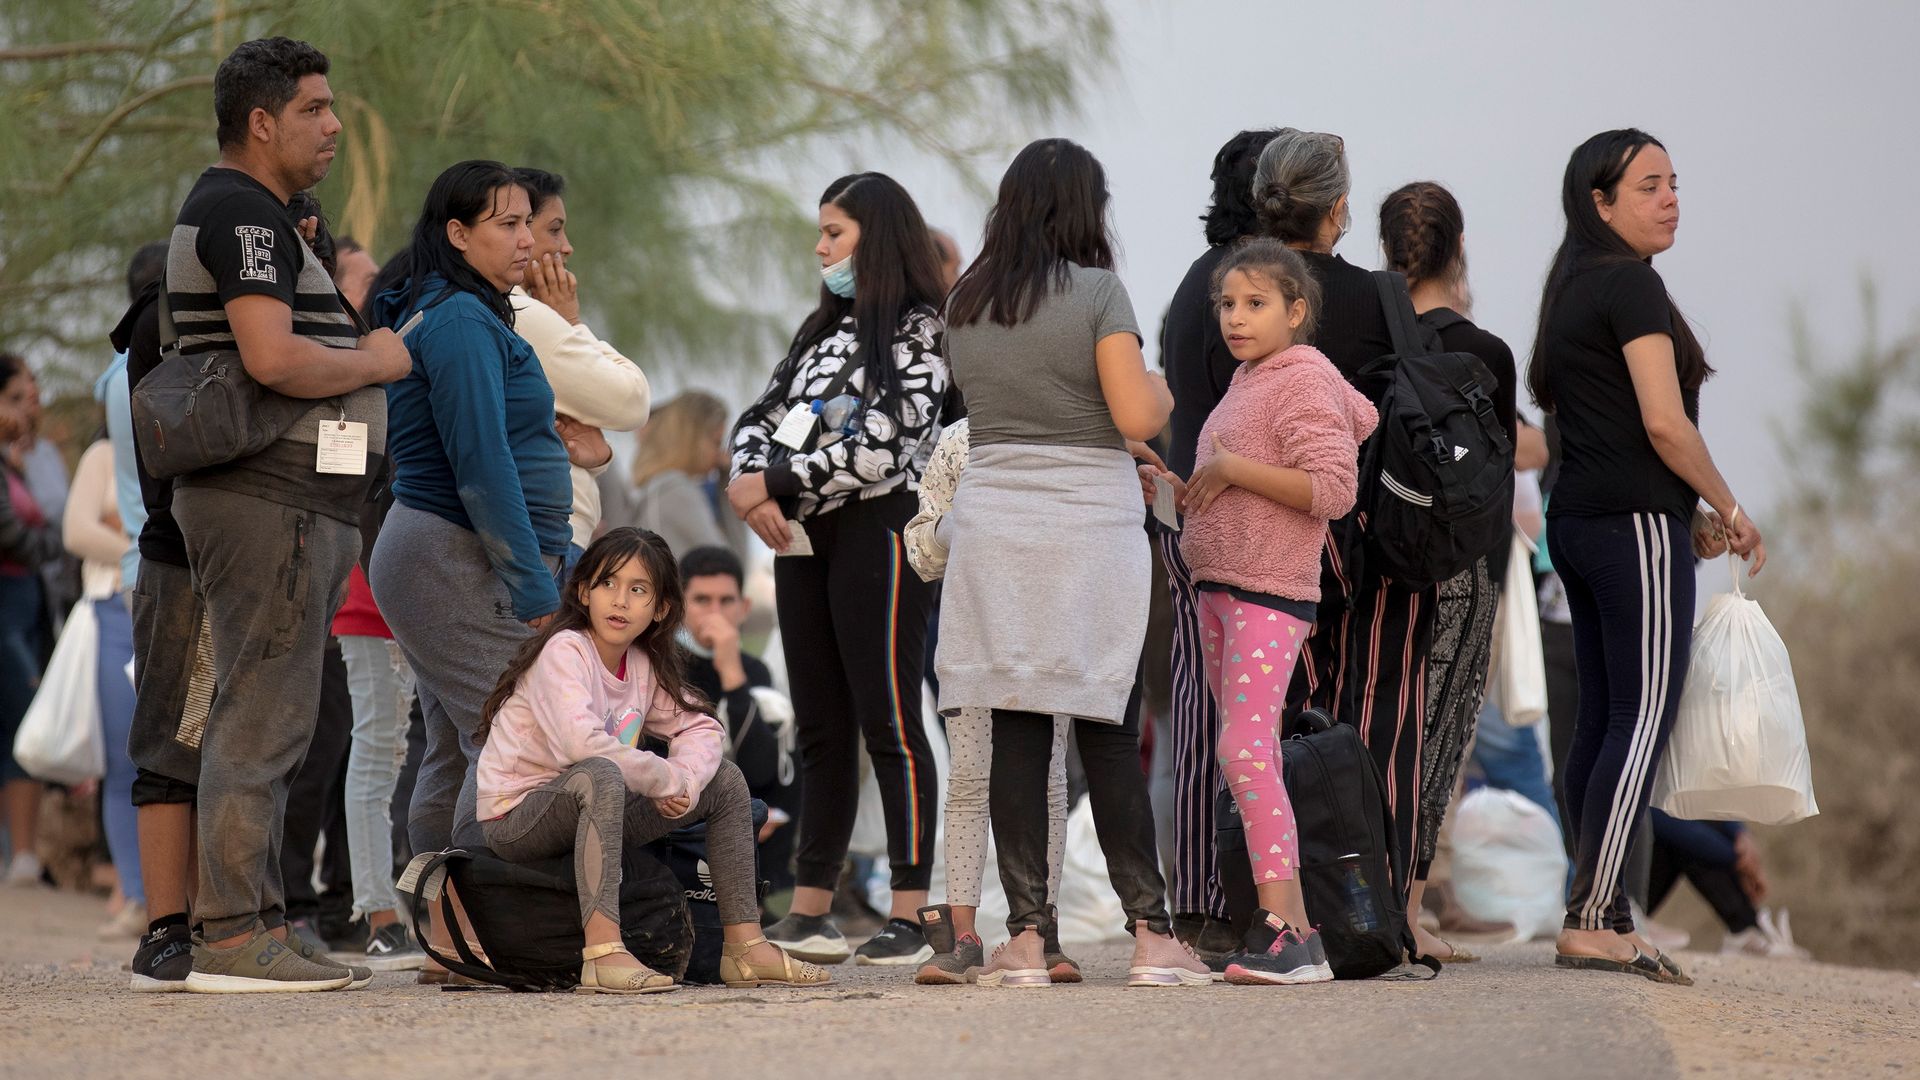 Migrants seeking asylum wait to board a bus at a checkpoint in Eagle Pass, Texas.